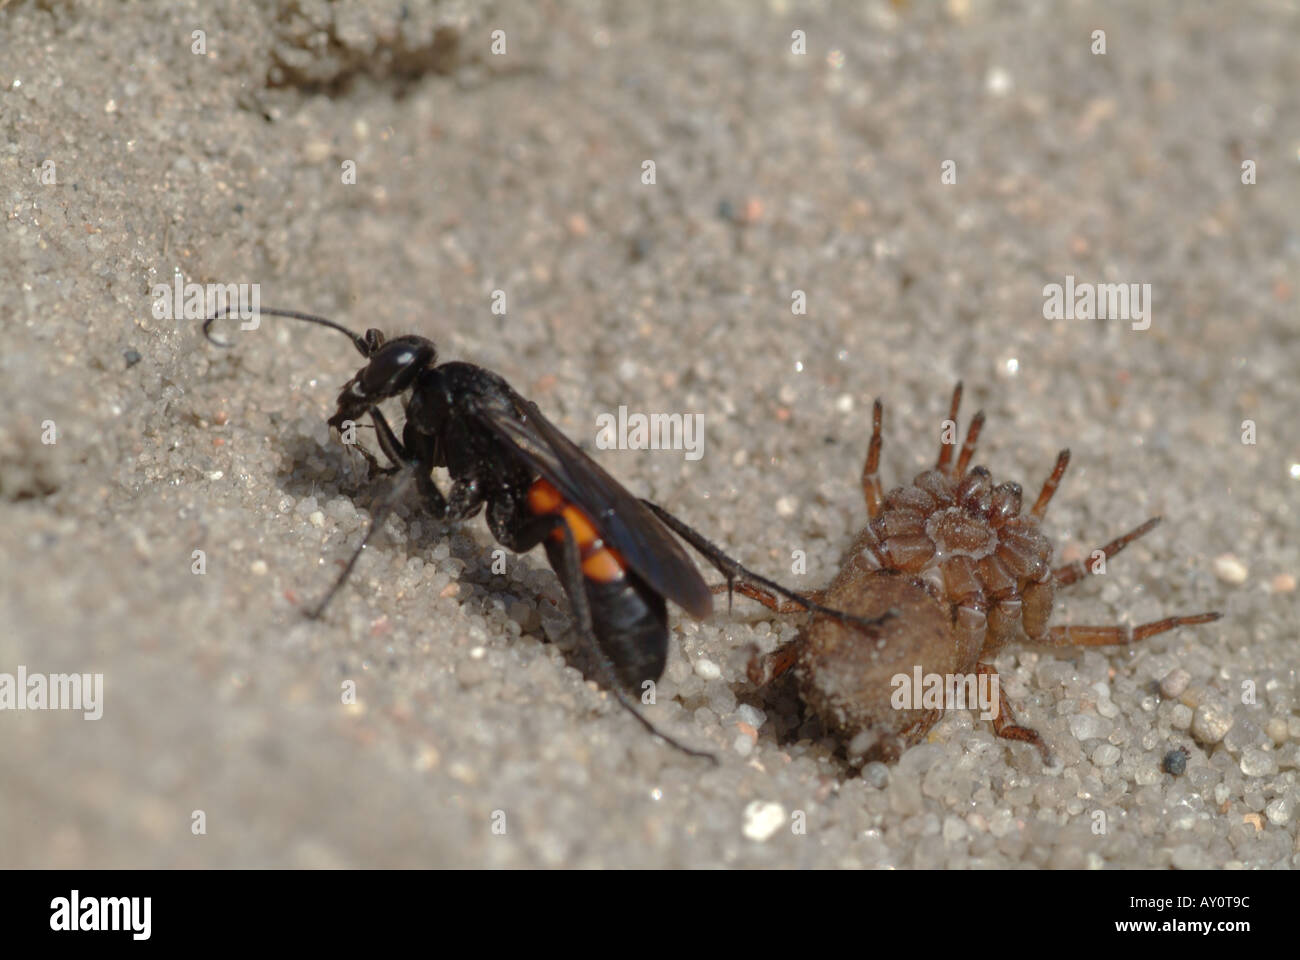 A Black Banded Spider Wasp Anoplius viaticus has succeeded in paralyzing a spider Stock Photo